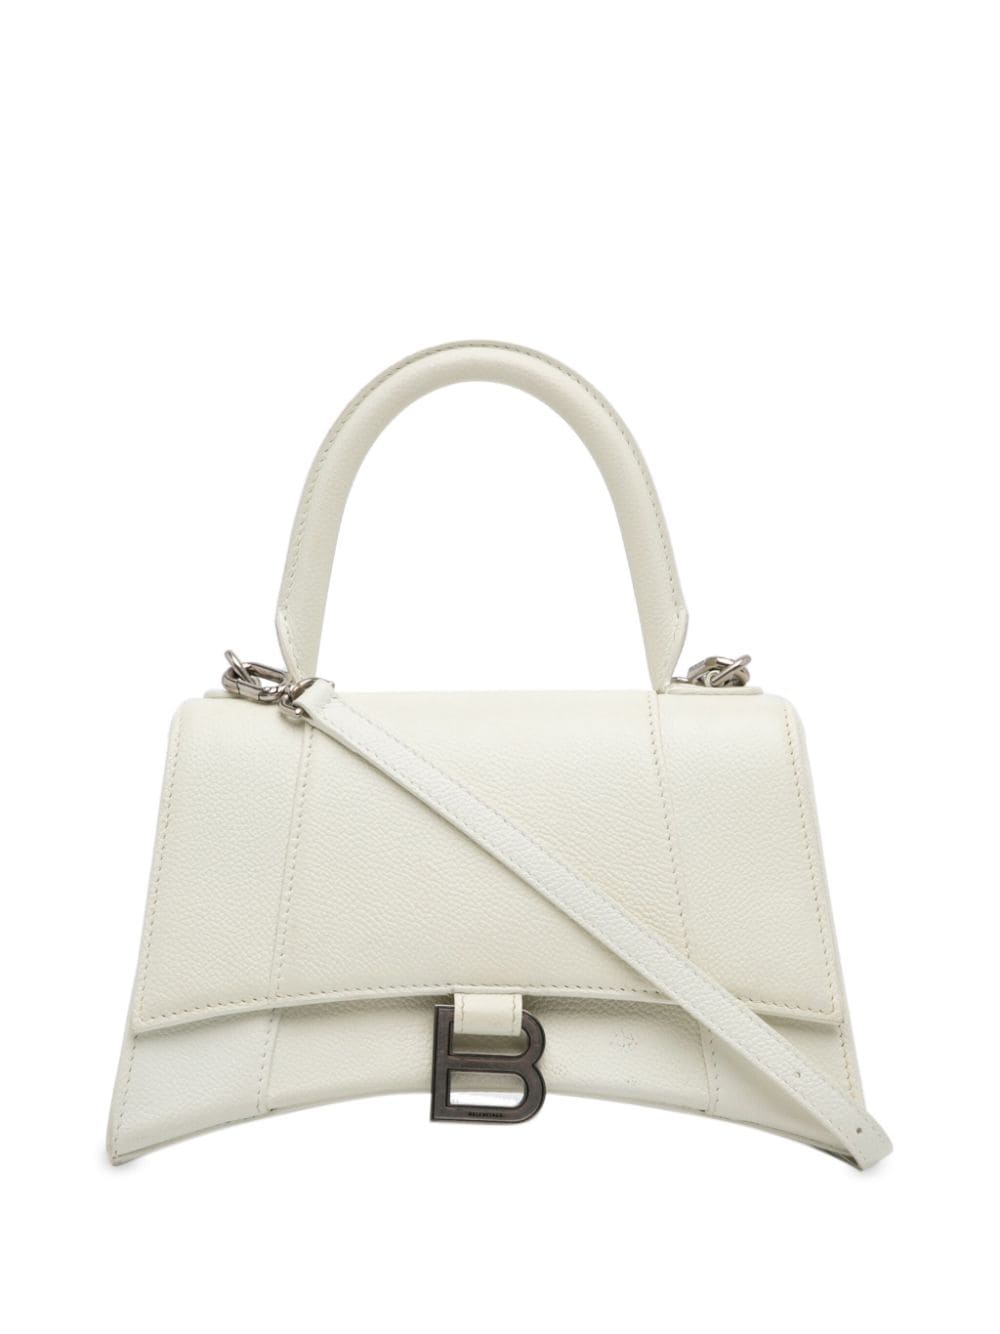 Pre-owned Balenciaga 2017 Small Hourglass Satchel In White